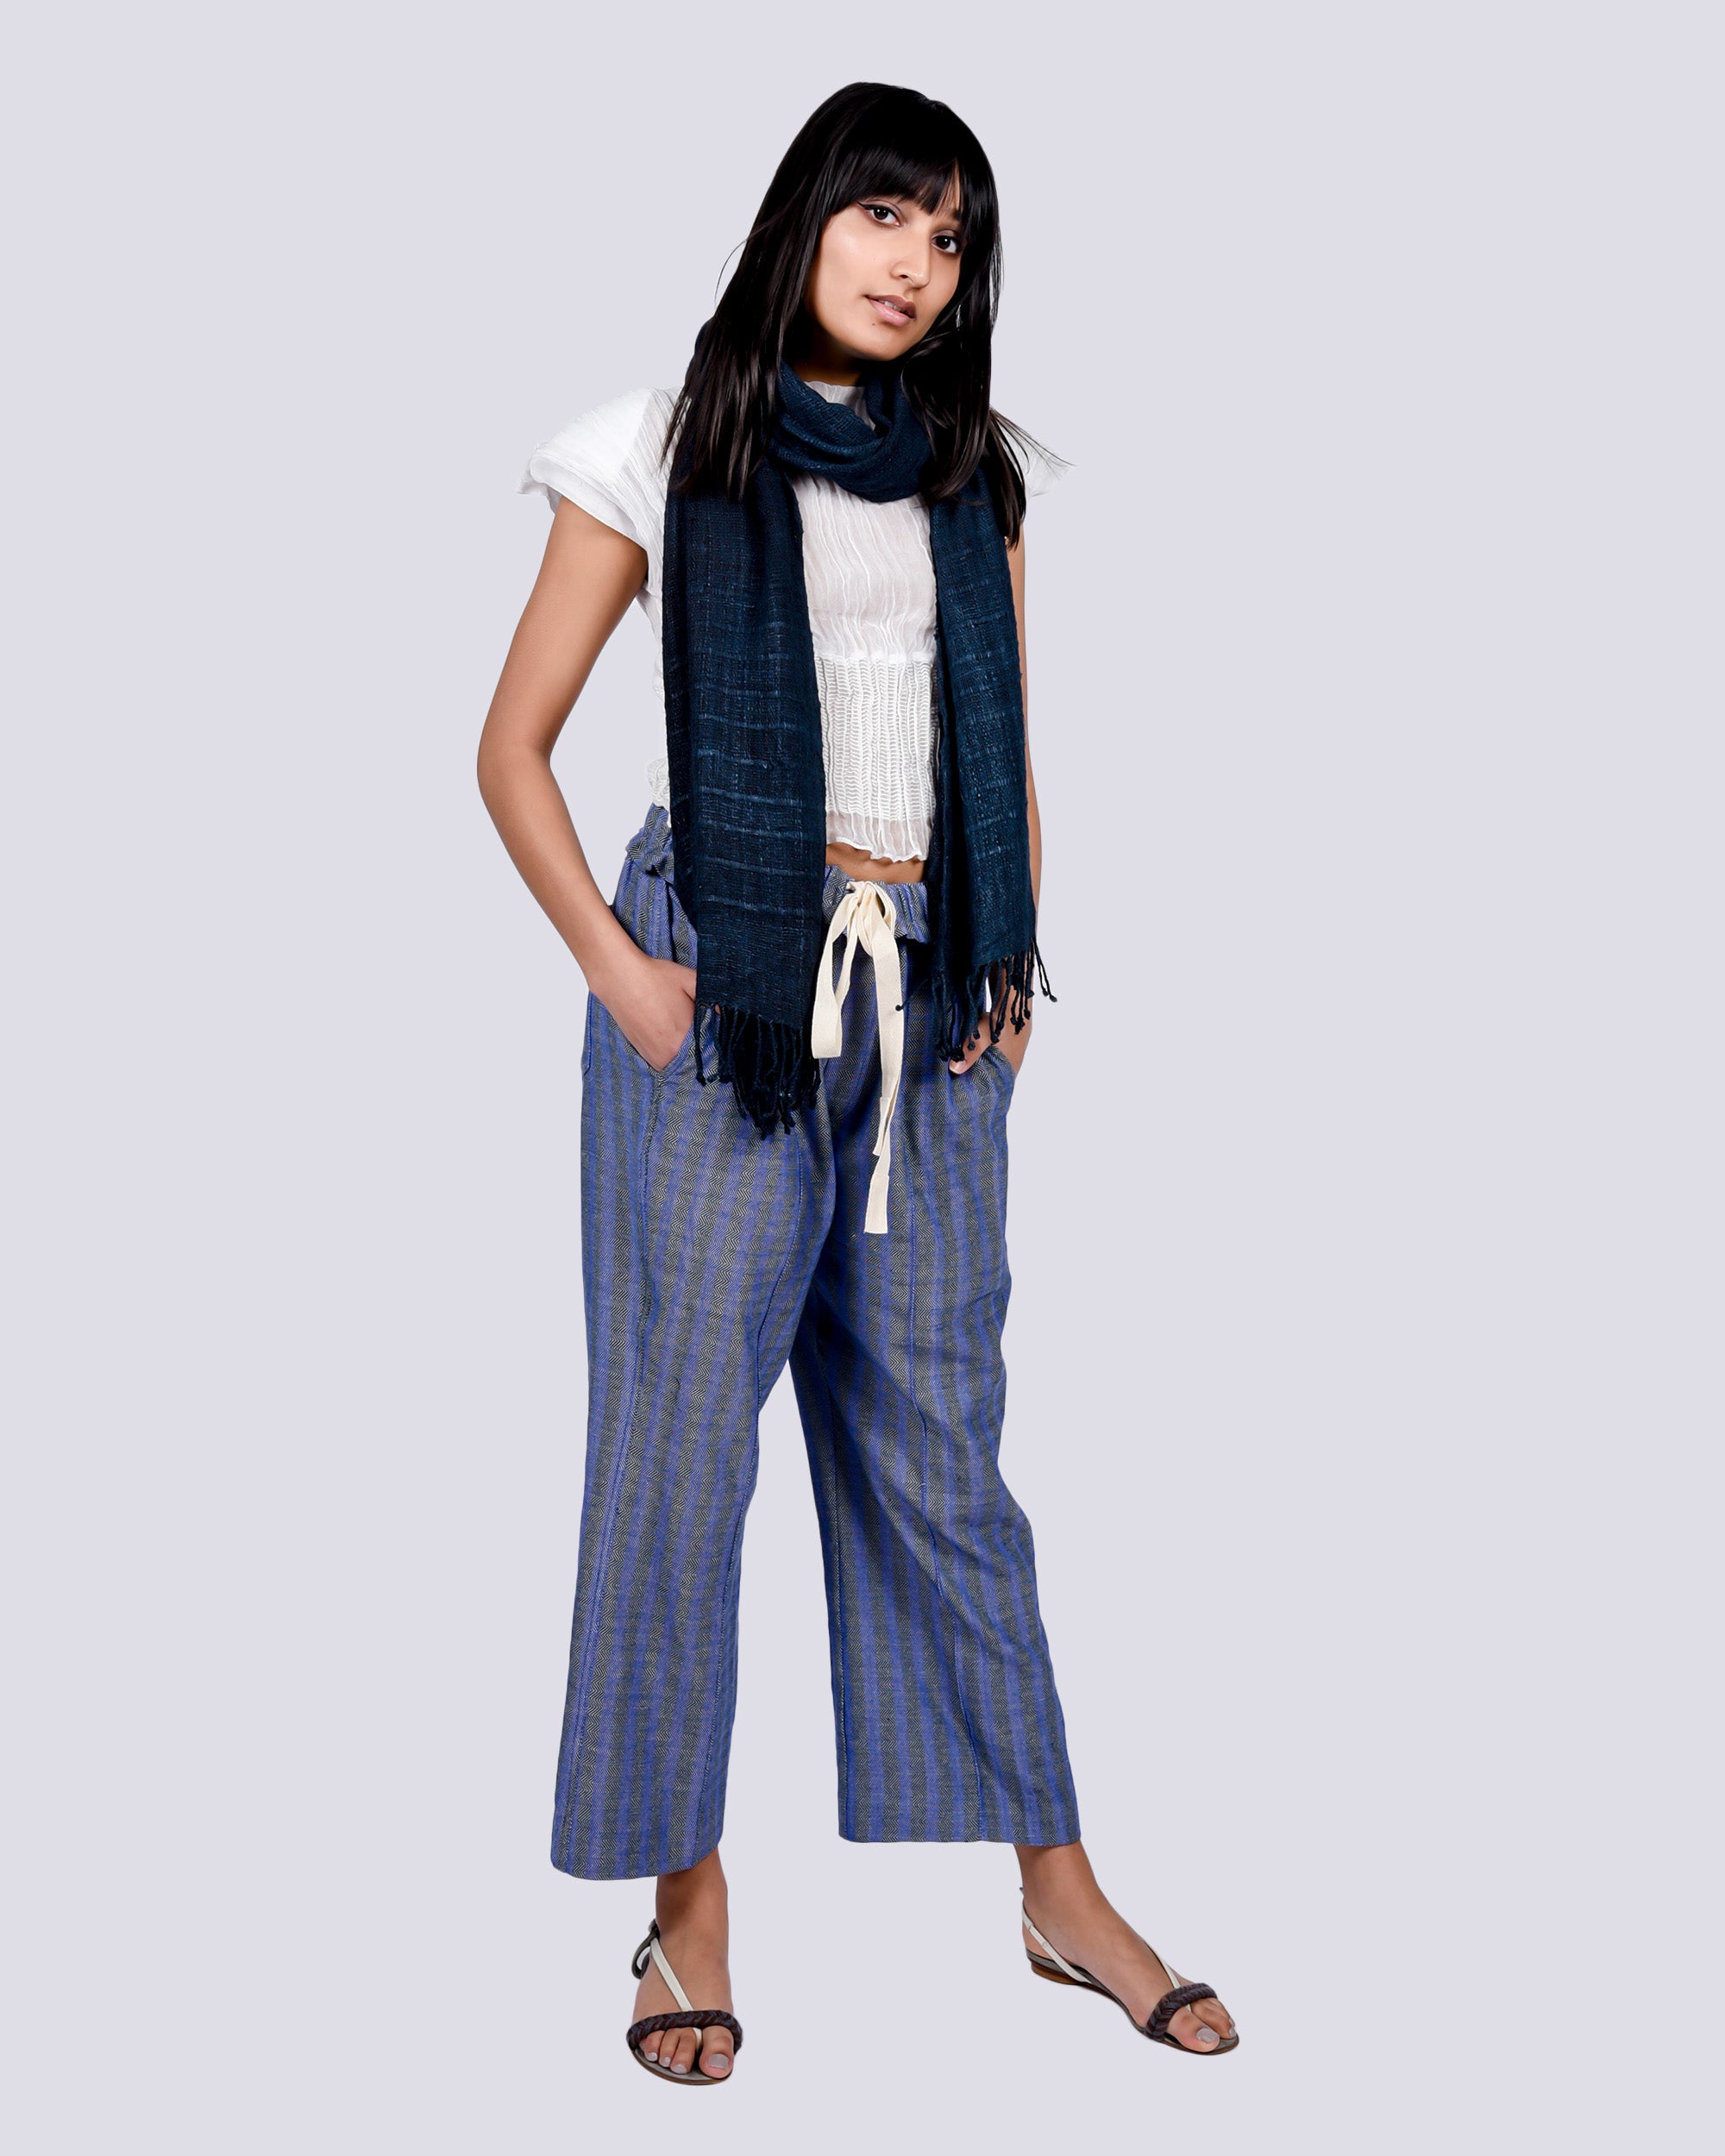 Wube pull-on pant